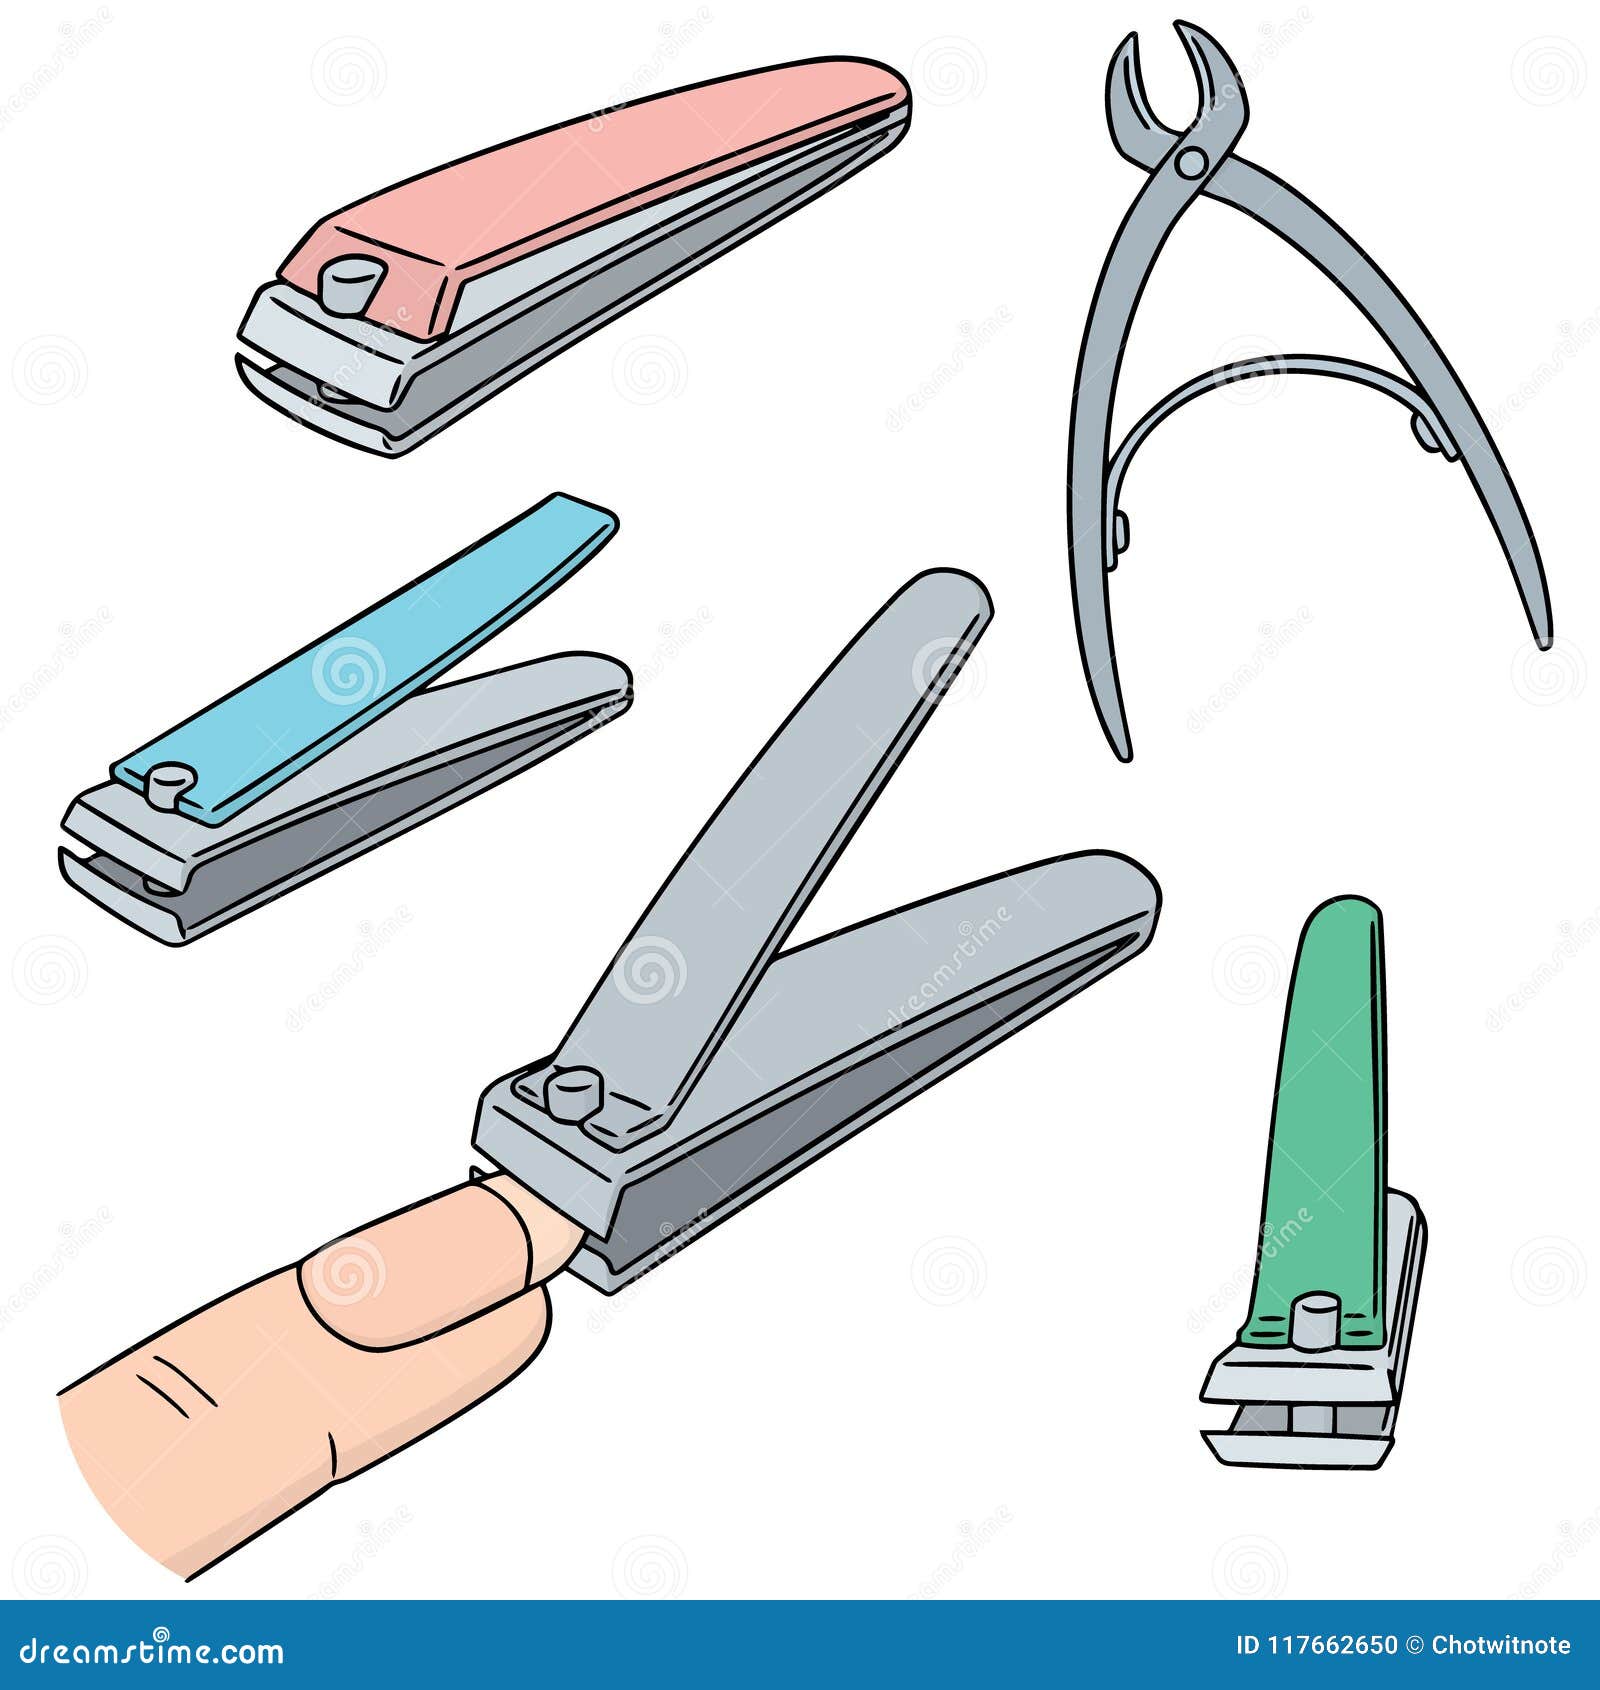 Nail Clippers | Free Stock Photo | Illustration of nail clippers - Clip Art  Library